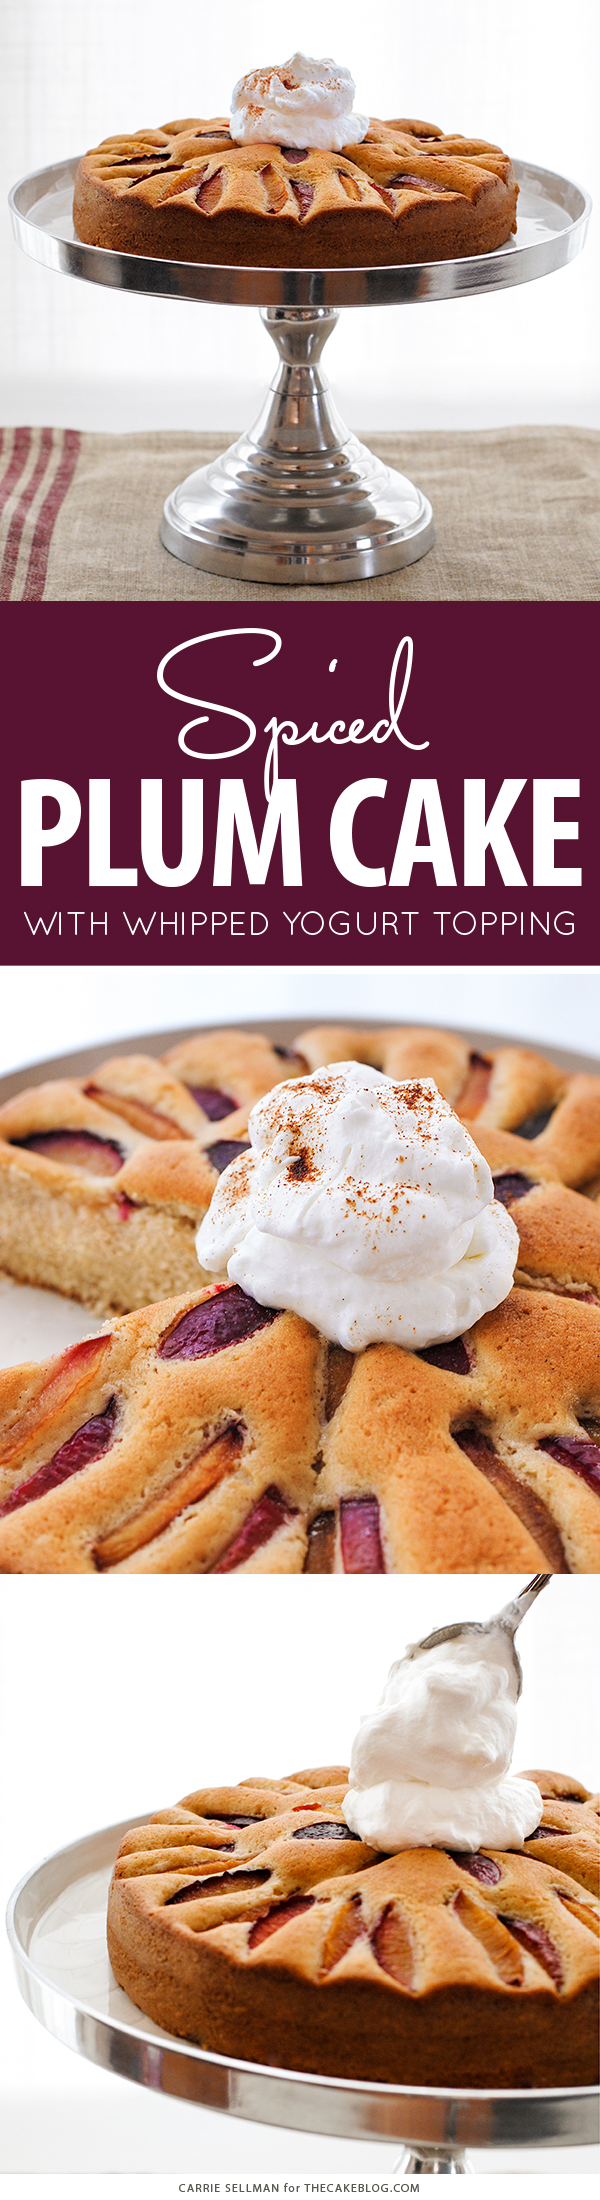 Spiced Plum Cake with Whipped Yogurt - an elegant yet easy cake recipe for holiday entertaining. | Carrie Sellman for TheCakeBlog.com